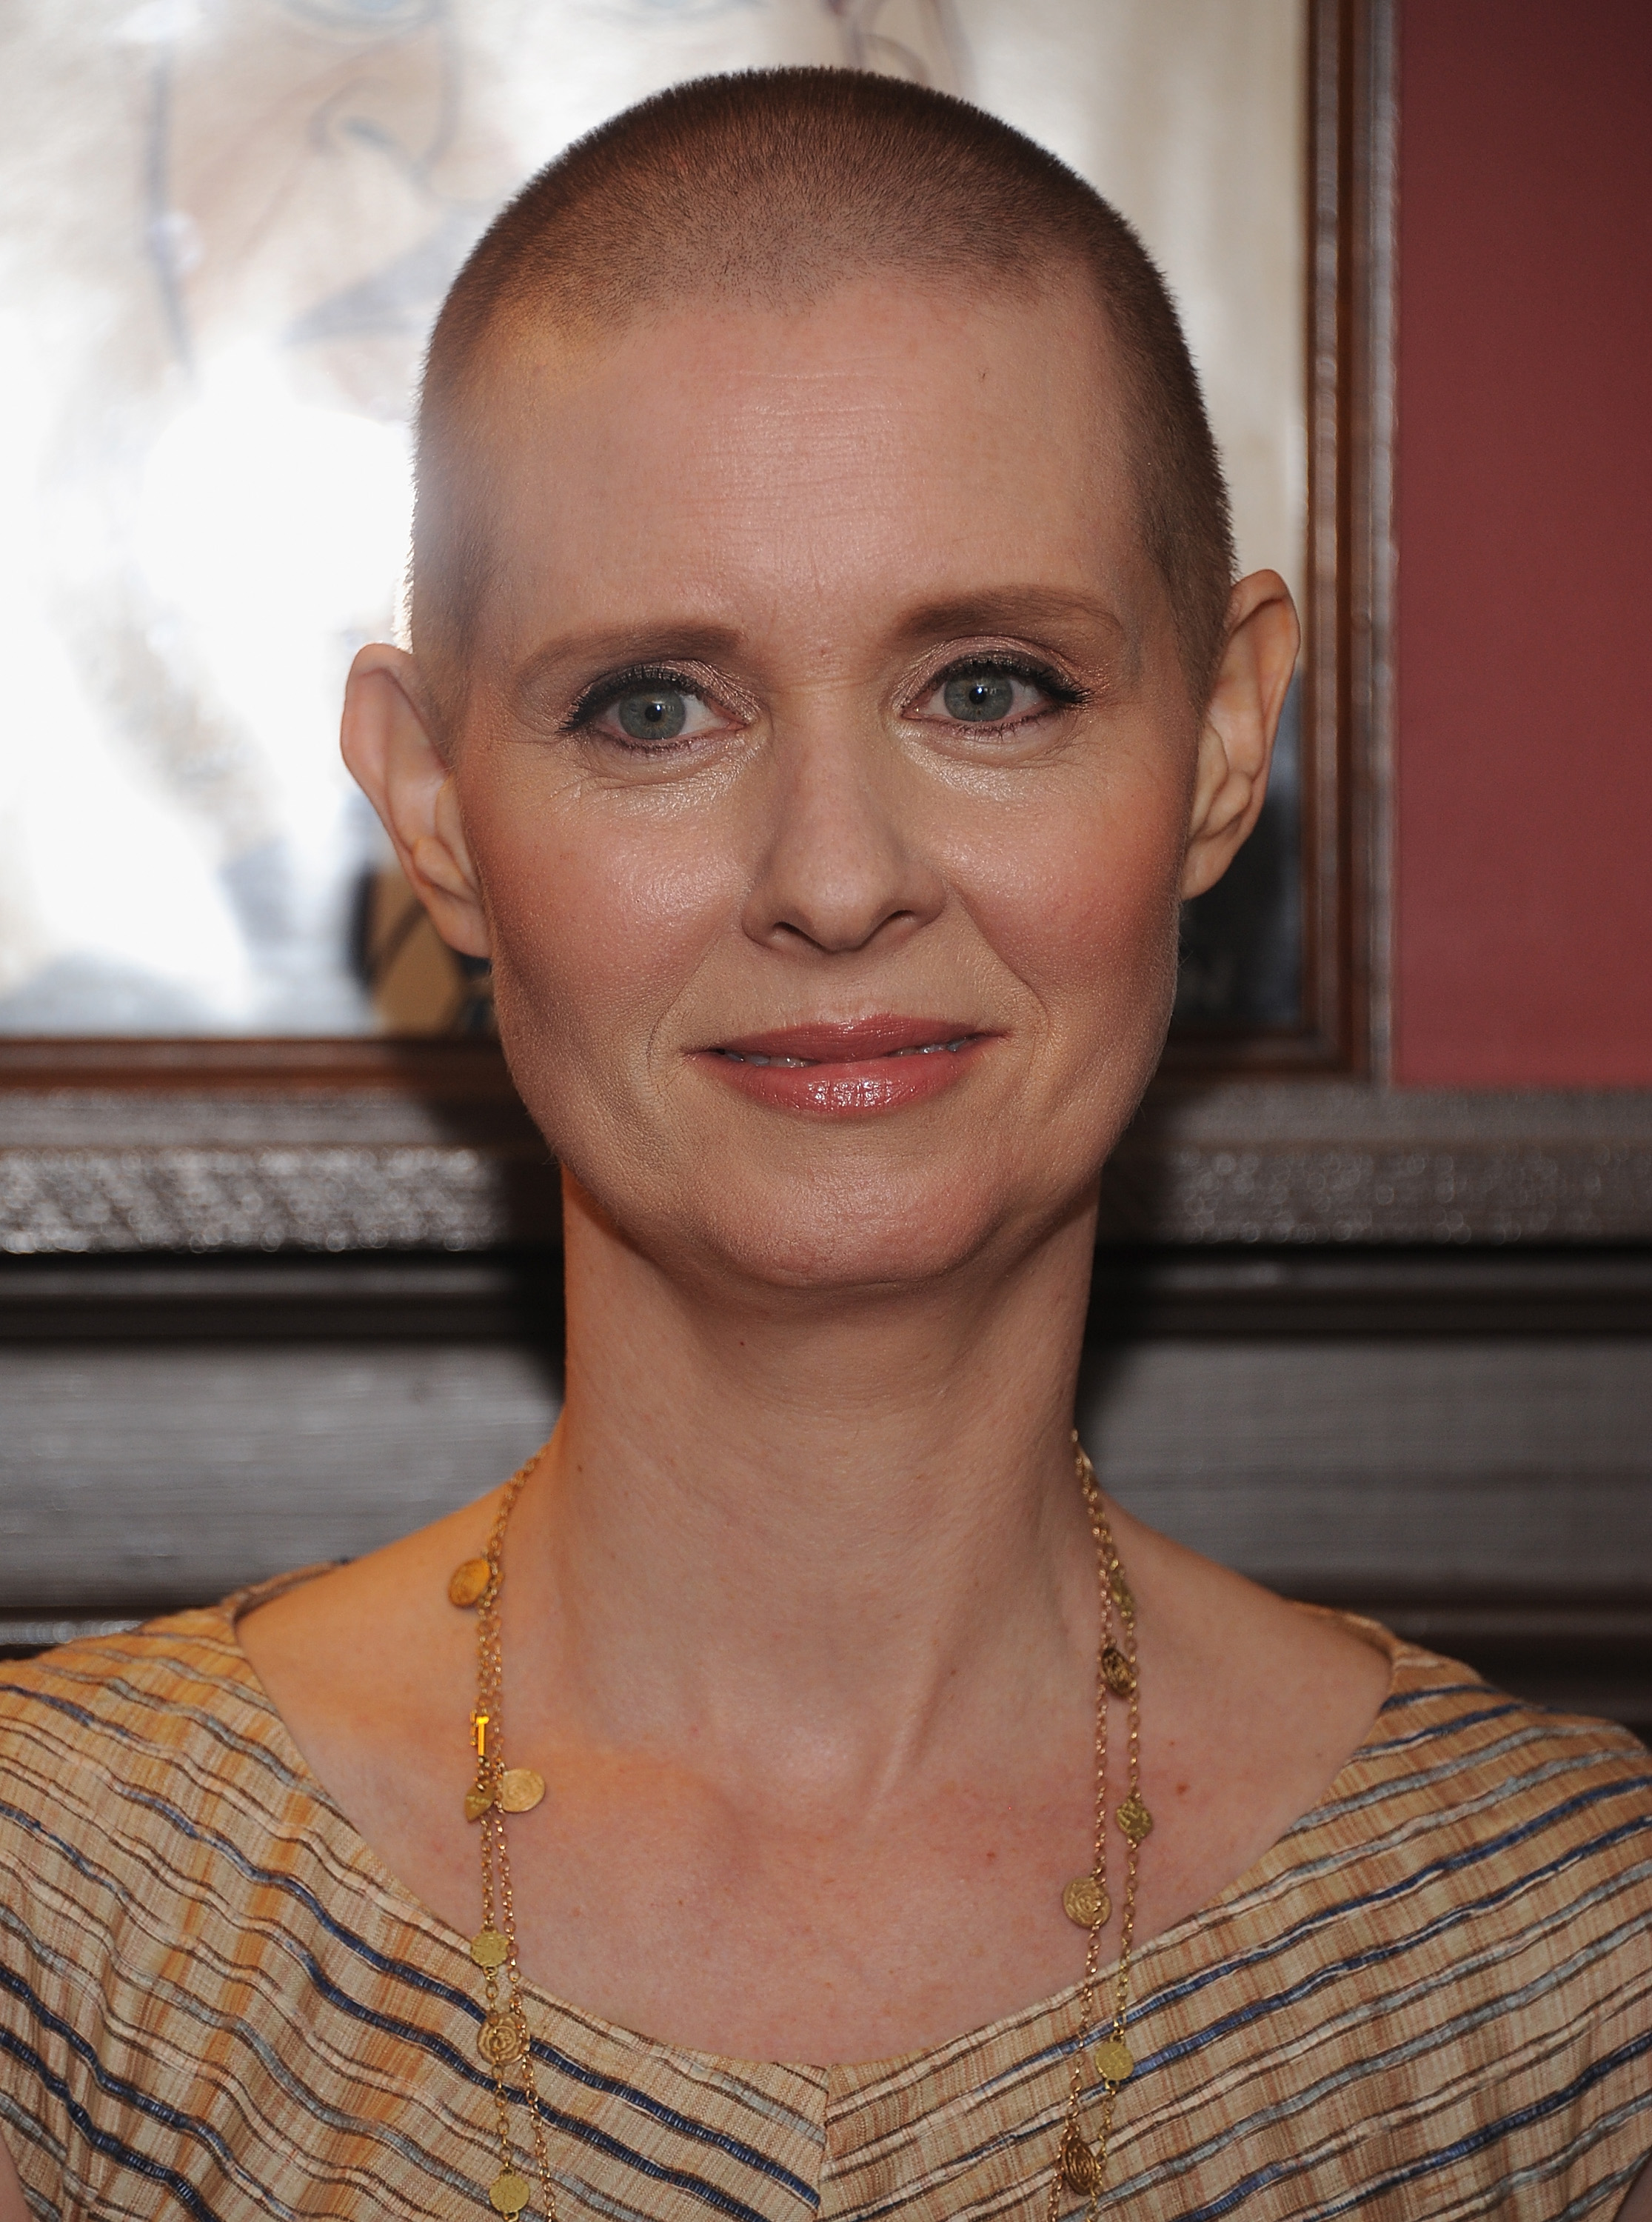 Cynthia Nixon on March 30, 2012, in New York City. | Source: Getty Images